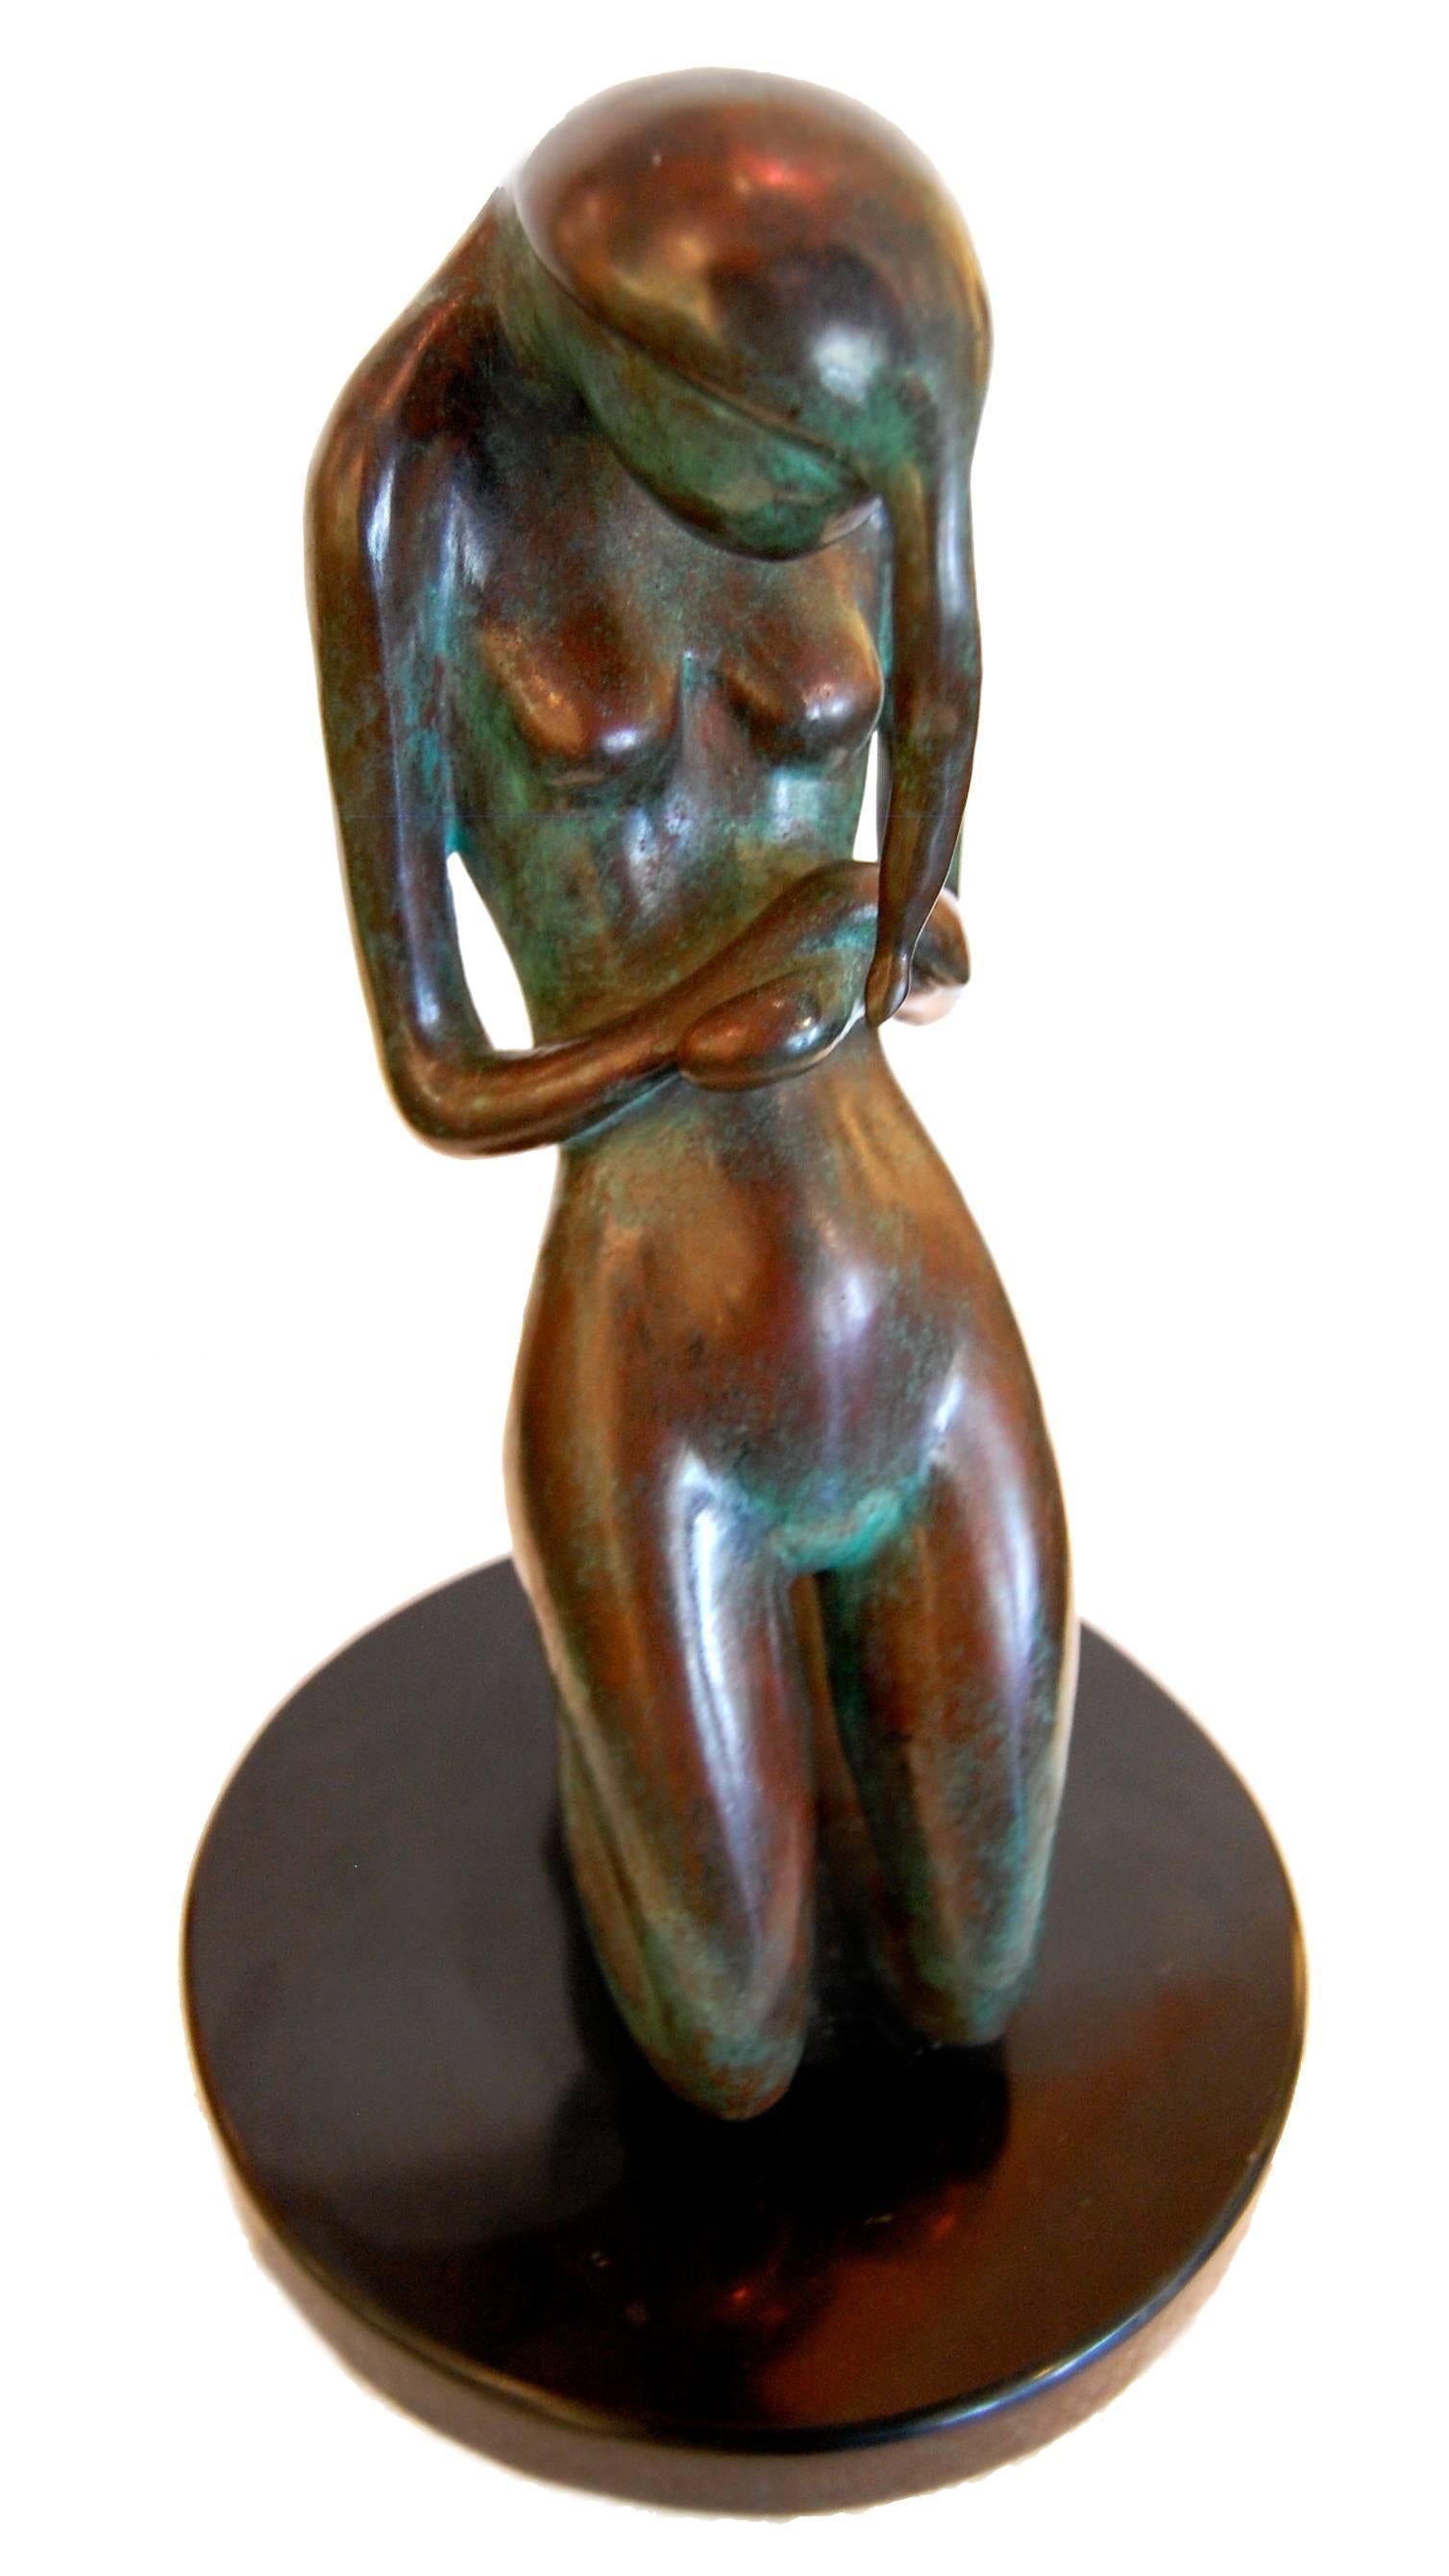 signed Frantzke; TWO nude sculptures stamped with “W.A.R 2/100”; bronze - Gold Nude Sculpture by Unknown